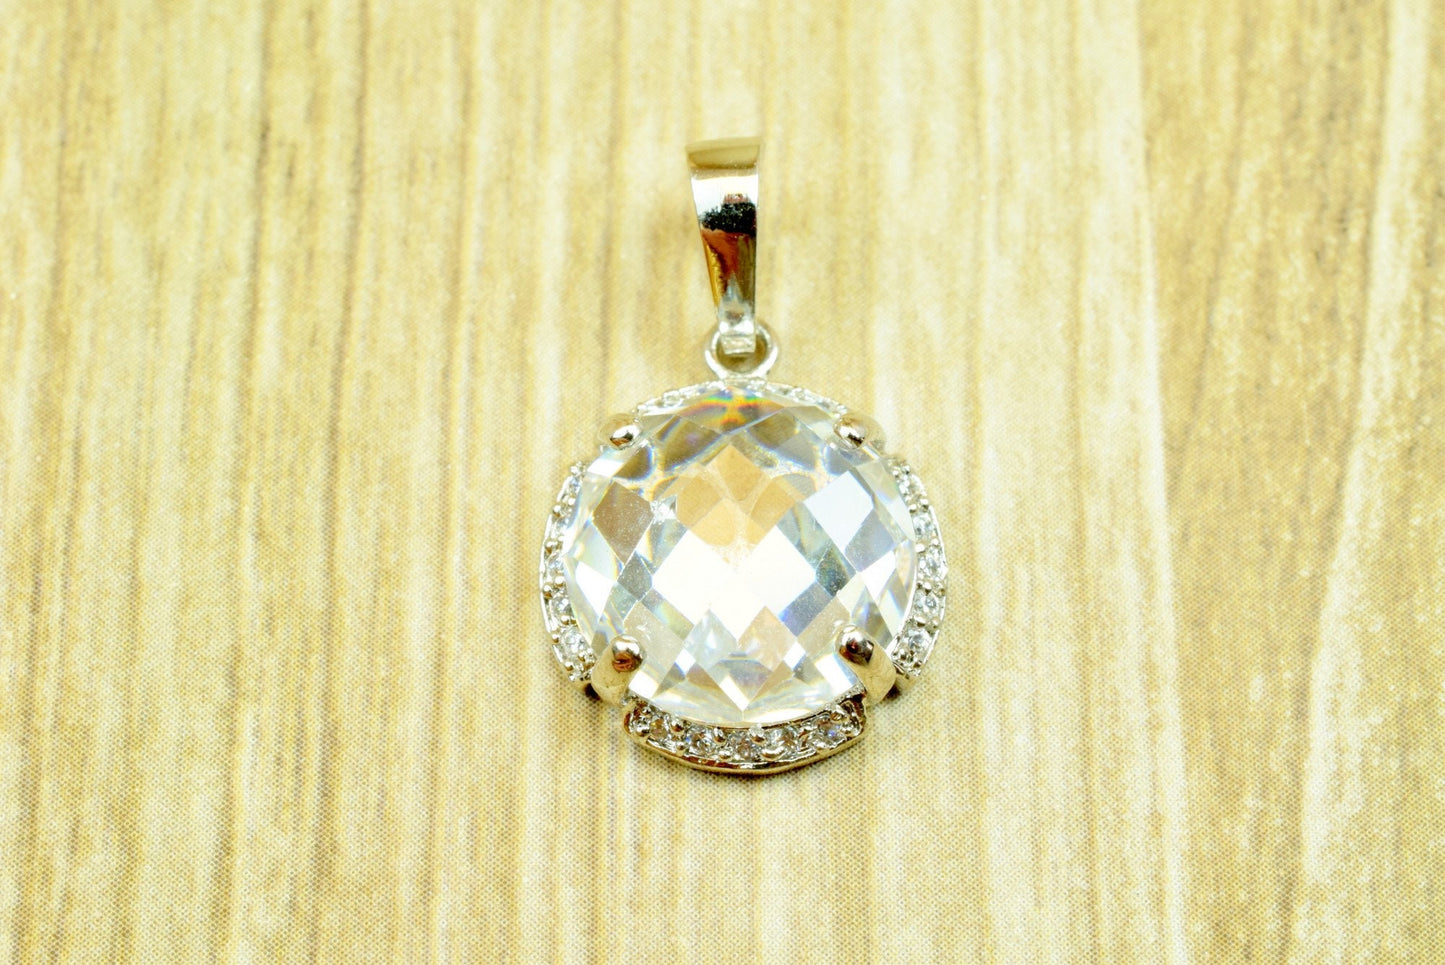 White Gold Filled Bling Bling Pendant Size 19x16mm With CZ Cubic Zirconia Crystal Findings Charm For Jewelry Making